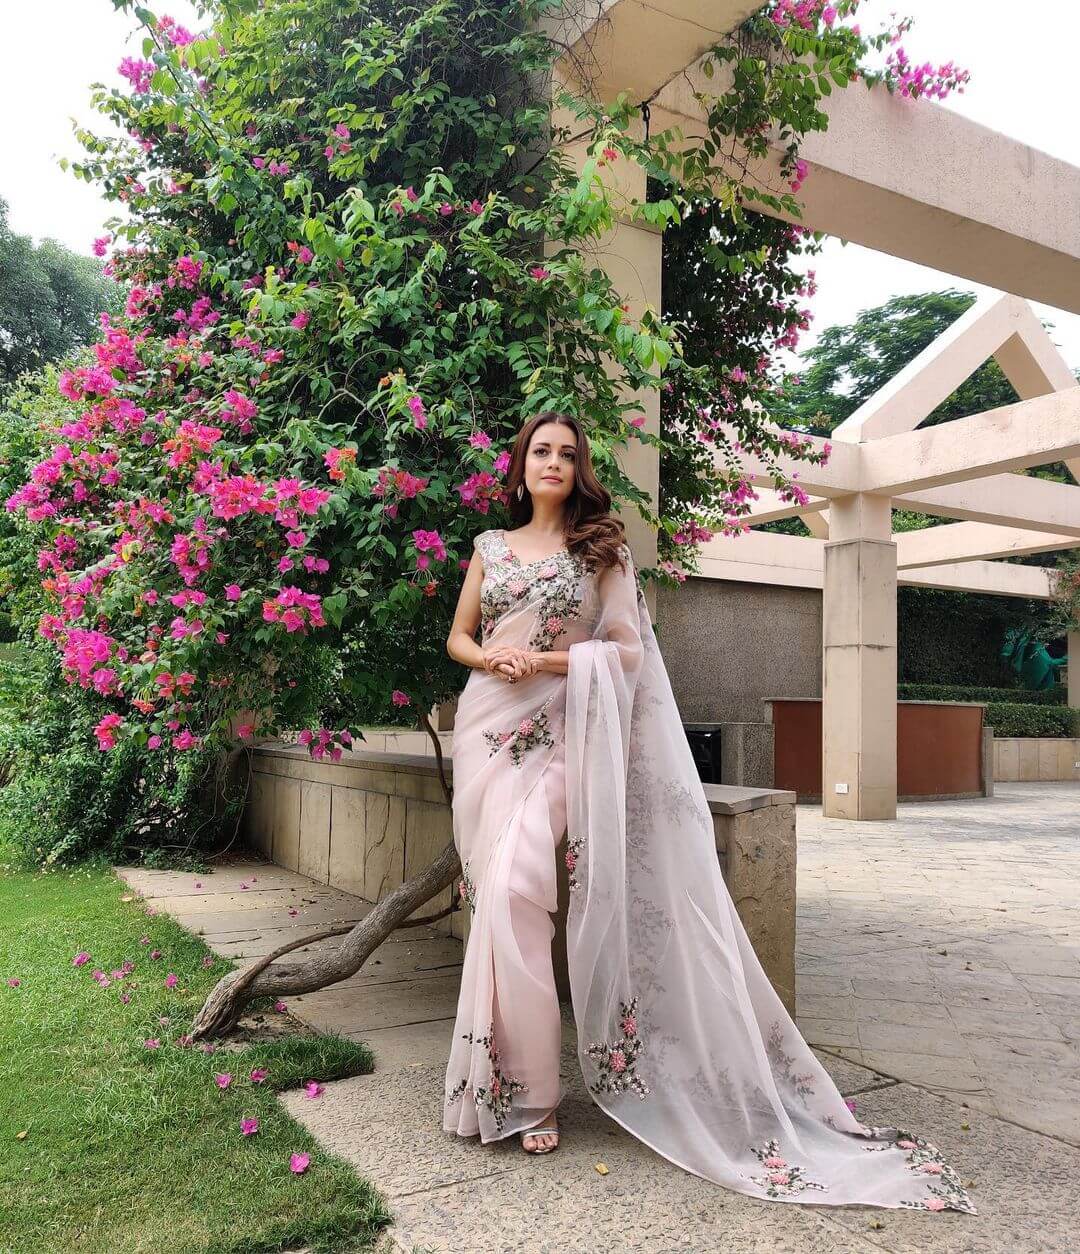 Dia Mirza Wore blush pink Floral Saree Designed By Anamika Khanna